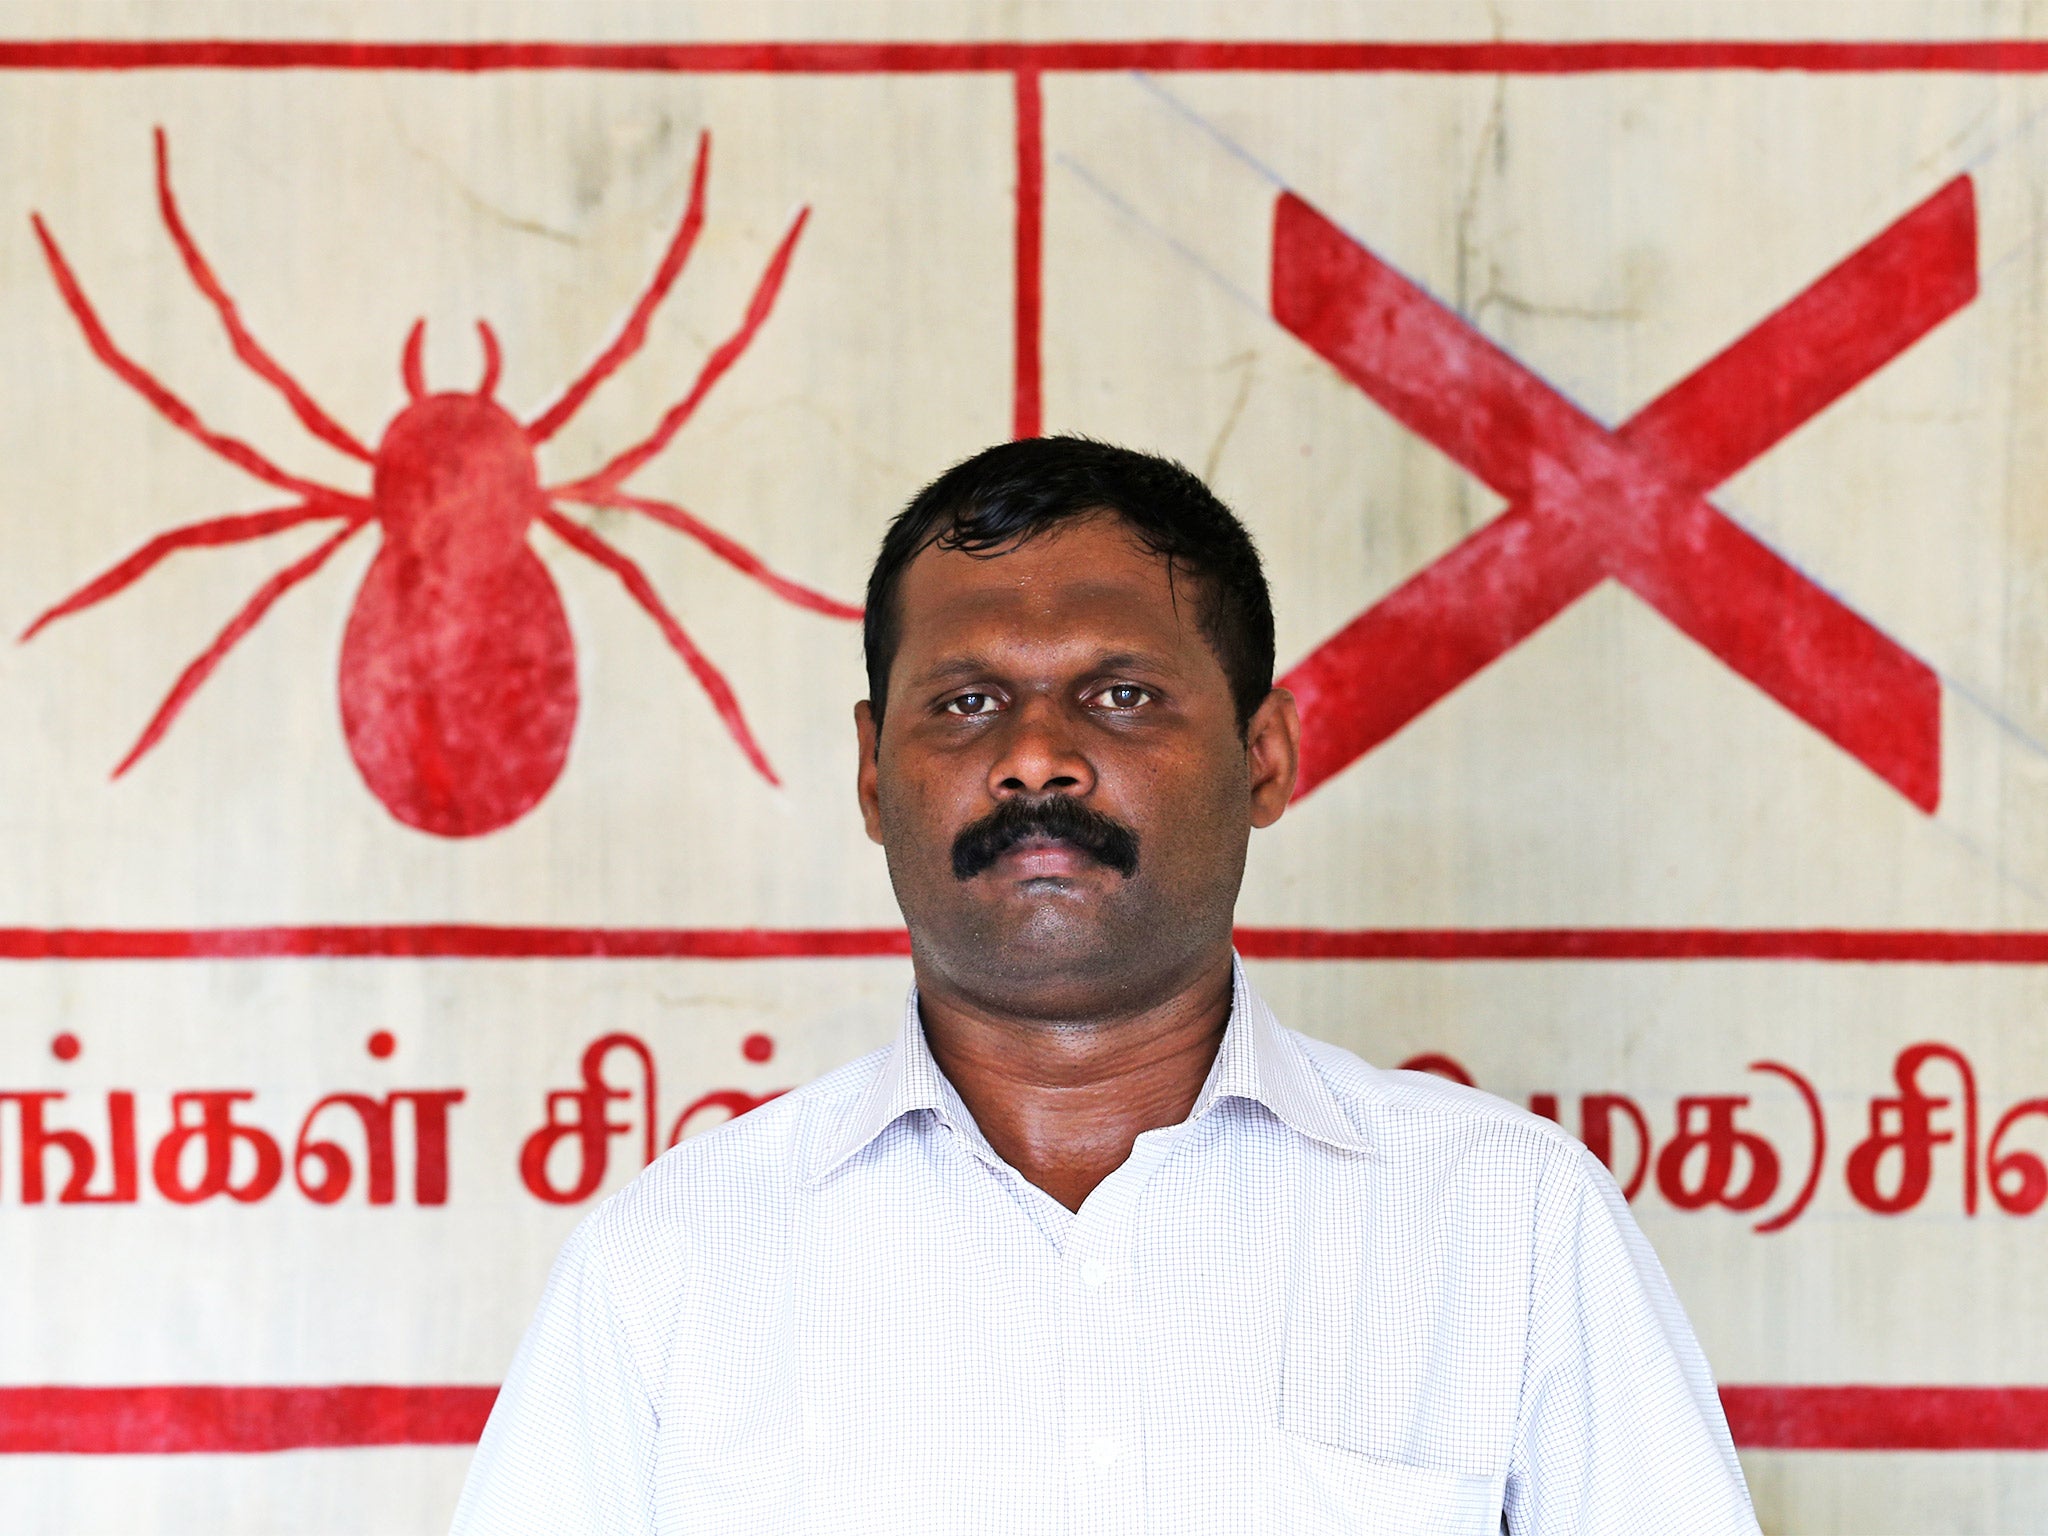 Sivanthan Navidra, aka Venthan, former Tamil Tiger and a Crusaders for Democracy candidate in Sri Lanka’s parliamentary election earlier this month, in front of the party symbol